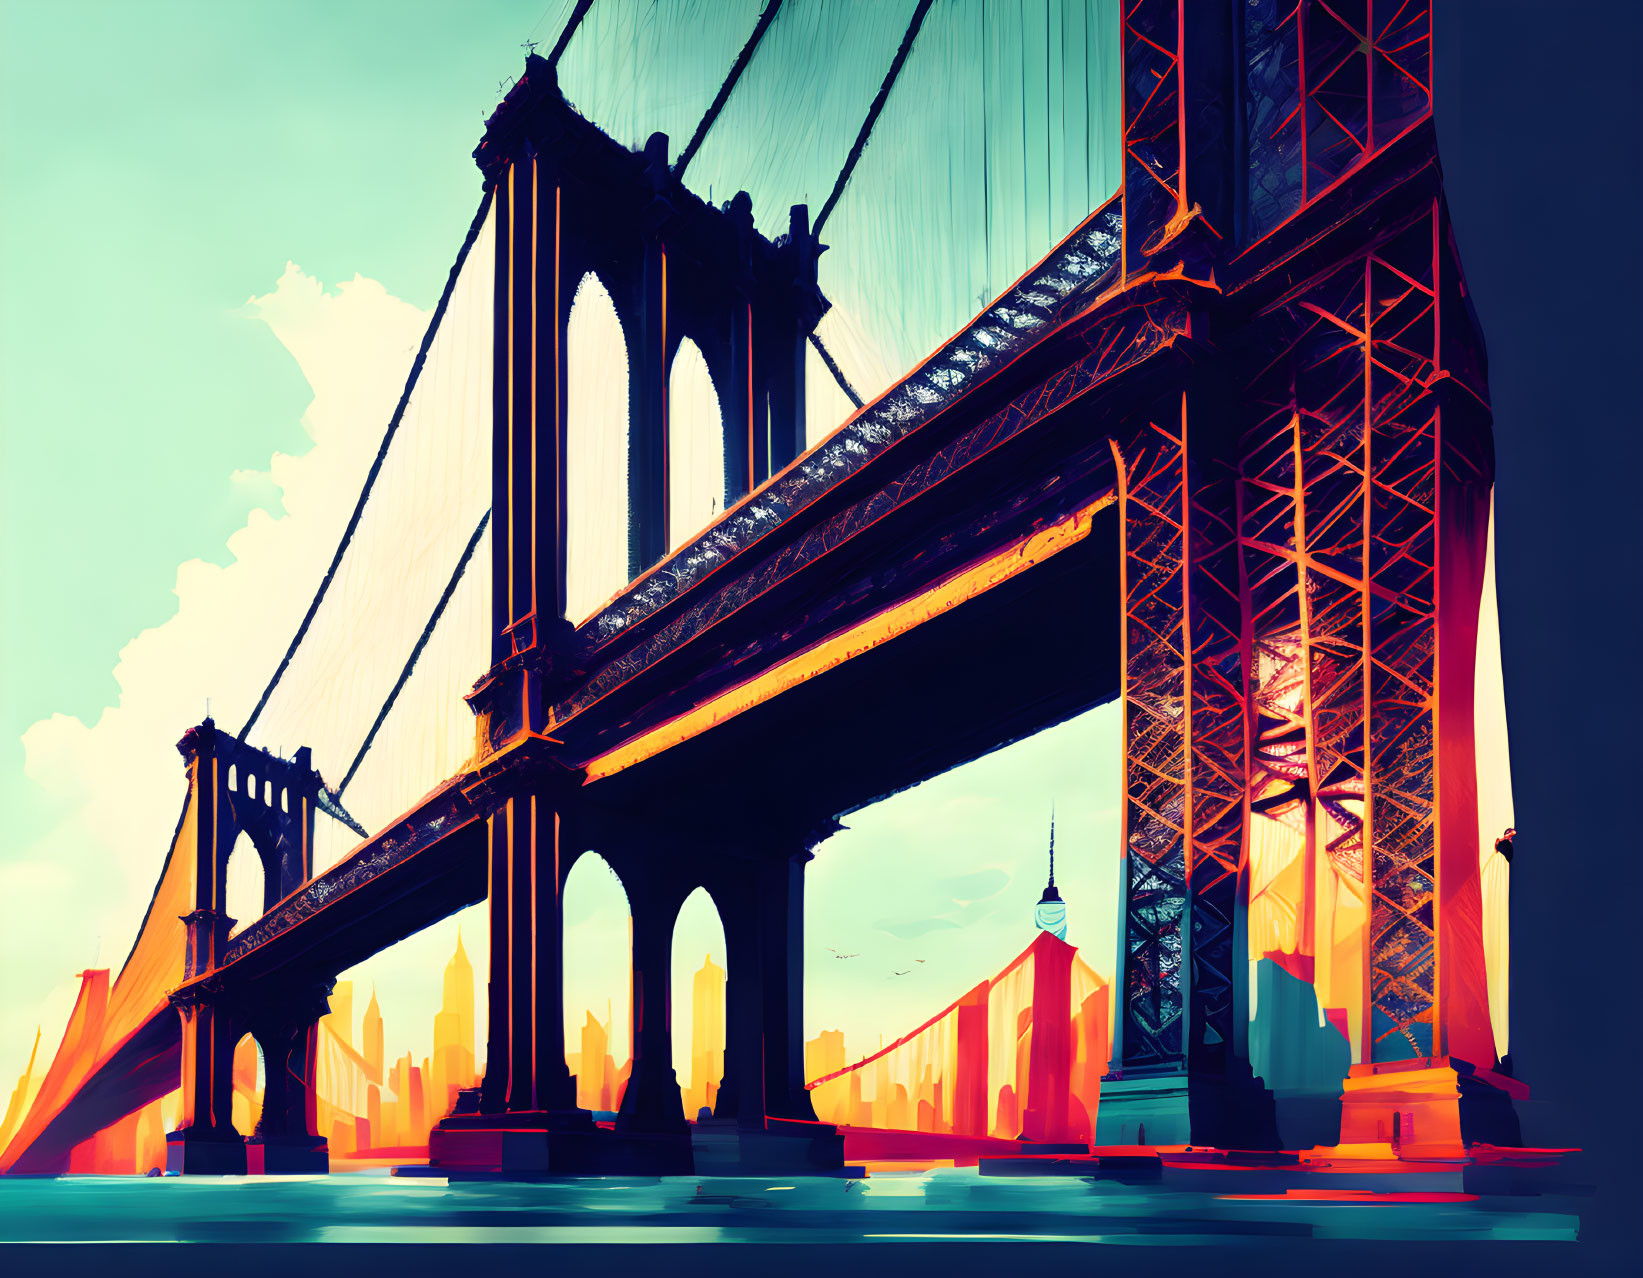 Illustration of suspension bridge with city skyline and vibrant sky